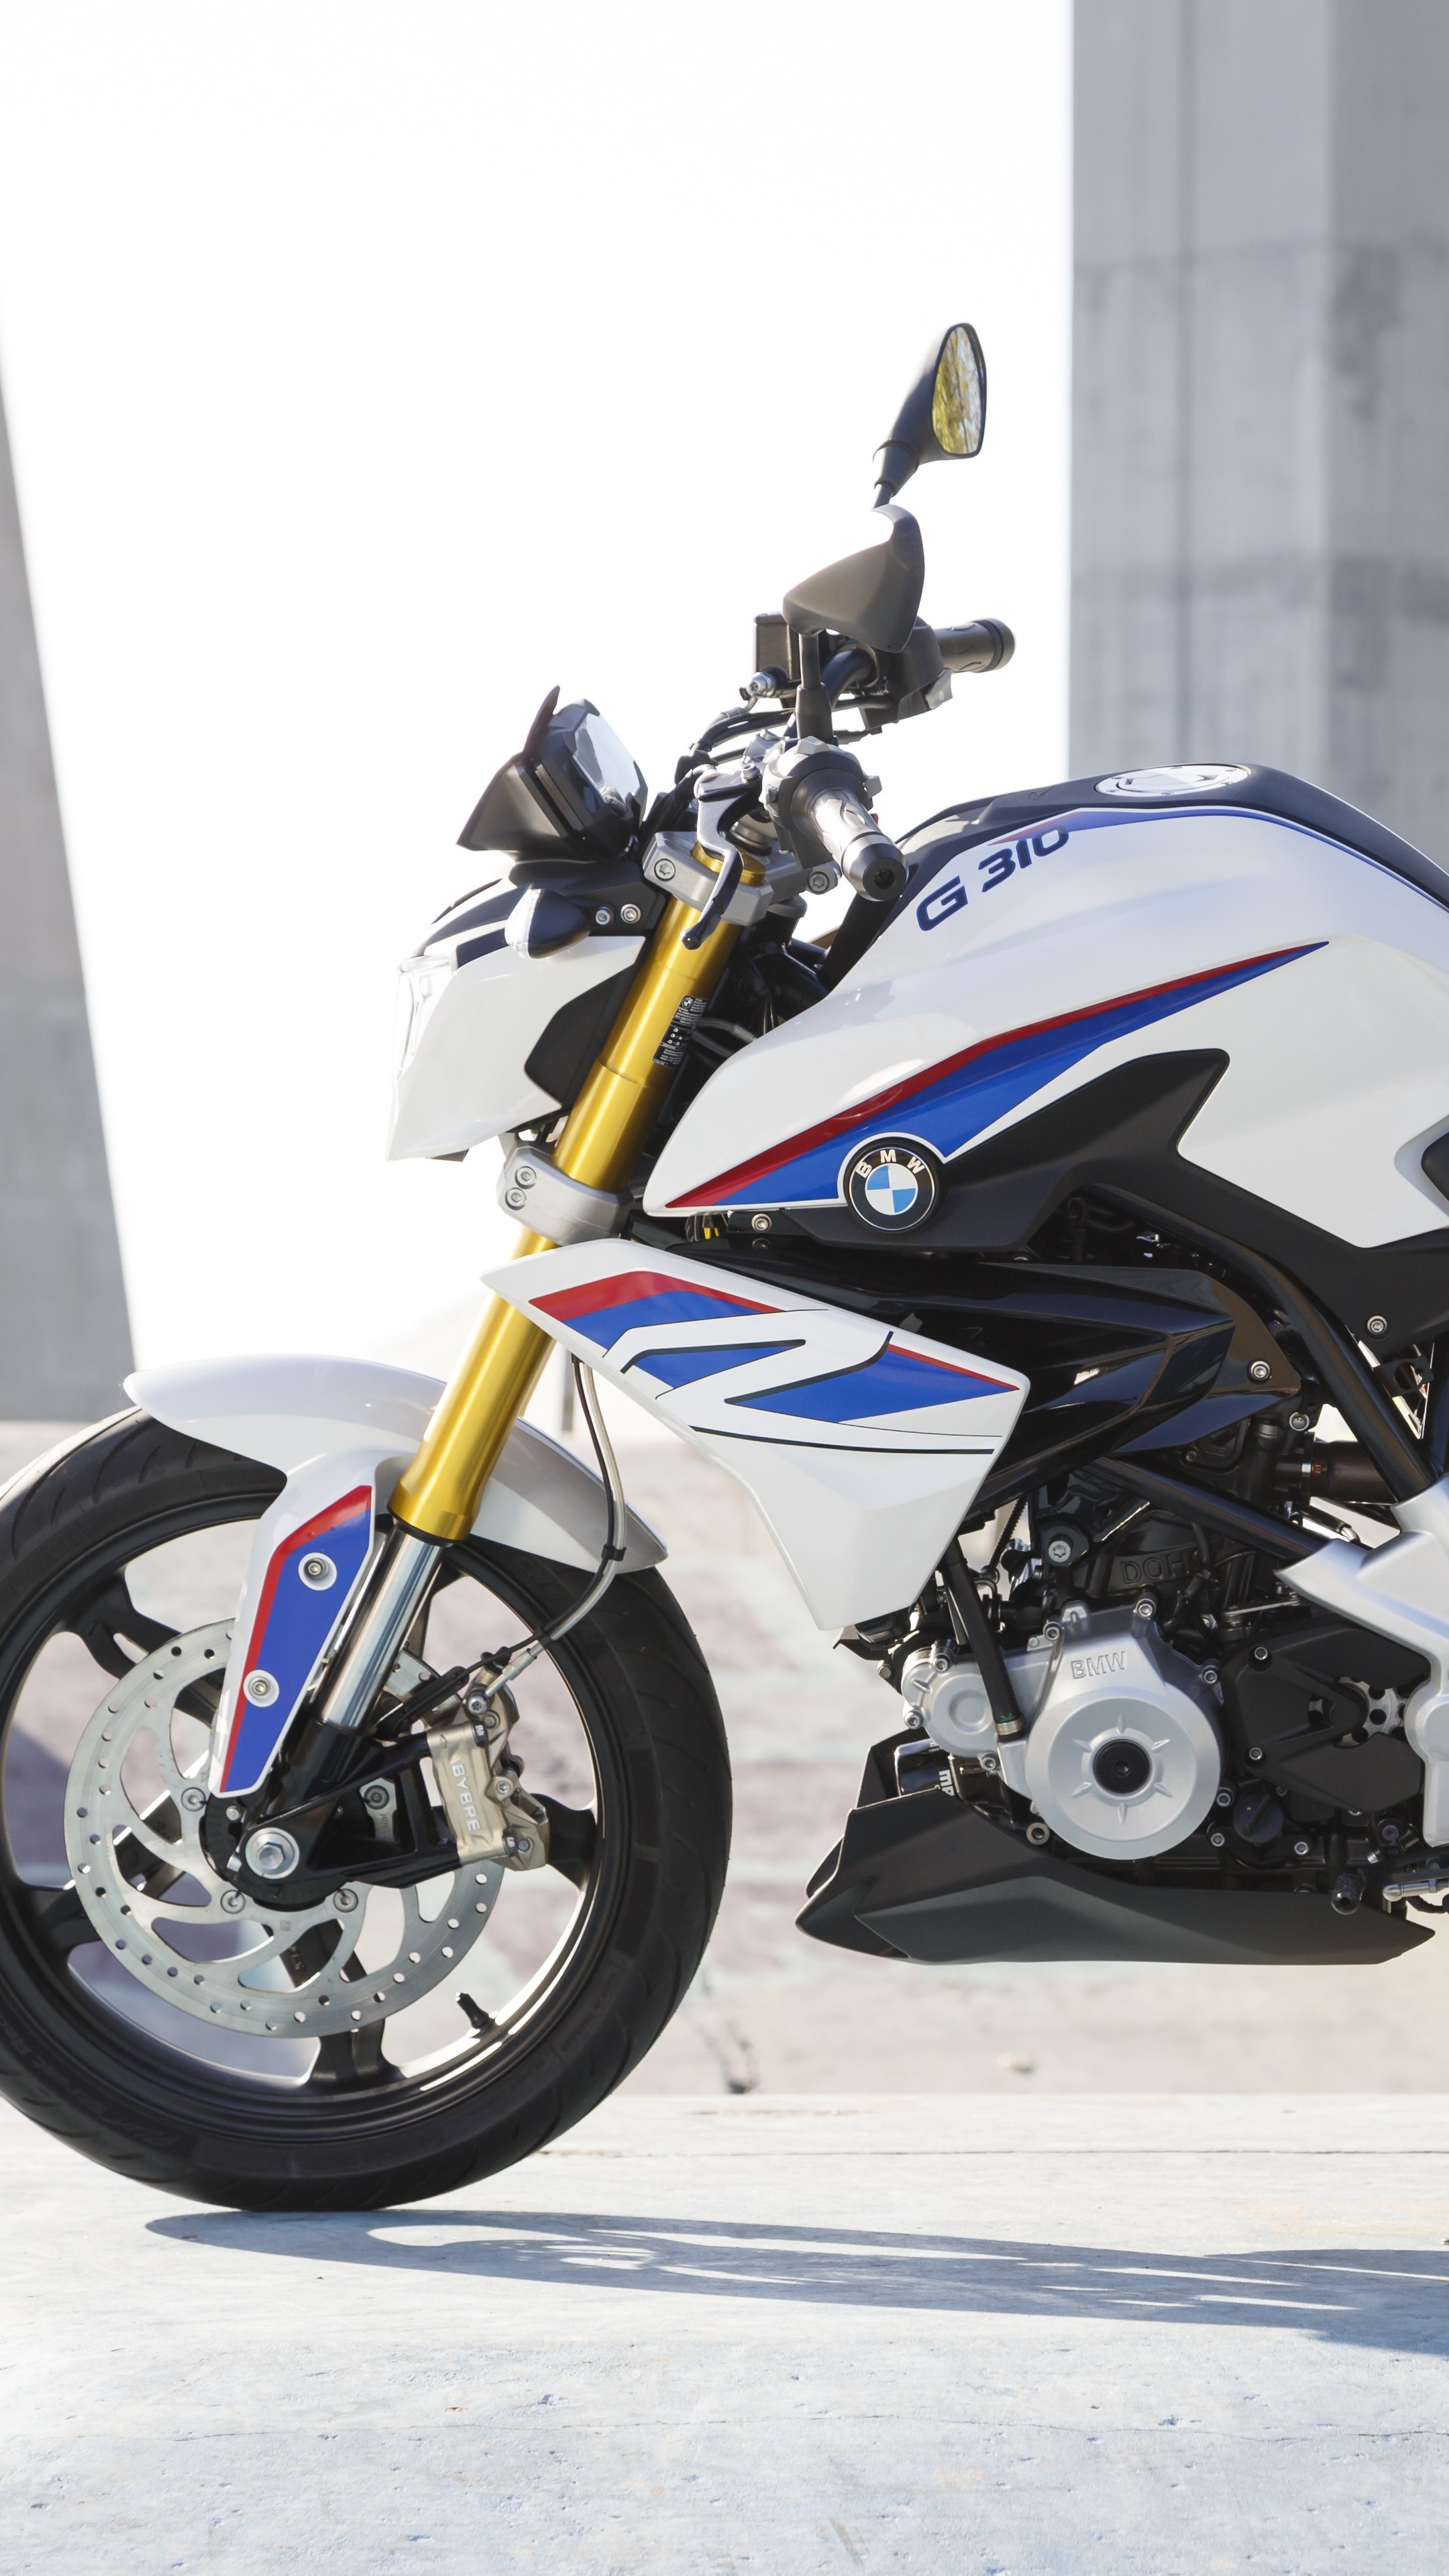 BMW G 310 R, High-resolution wallpapers, BMW motorcycle, Bikes, 2160x3840 4K Phone